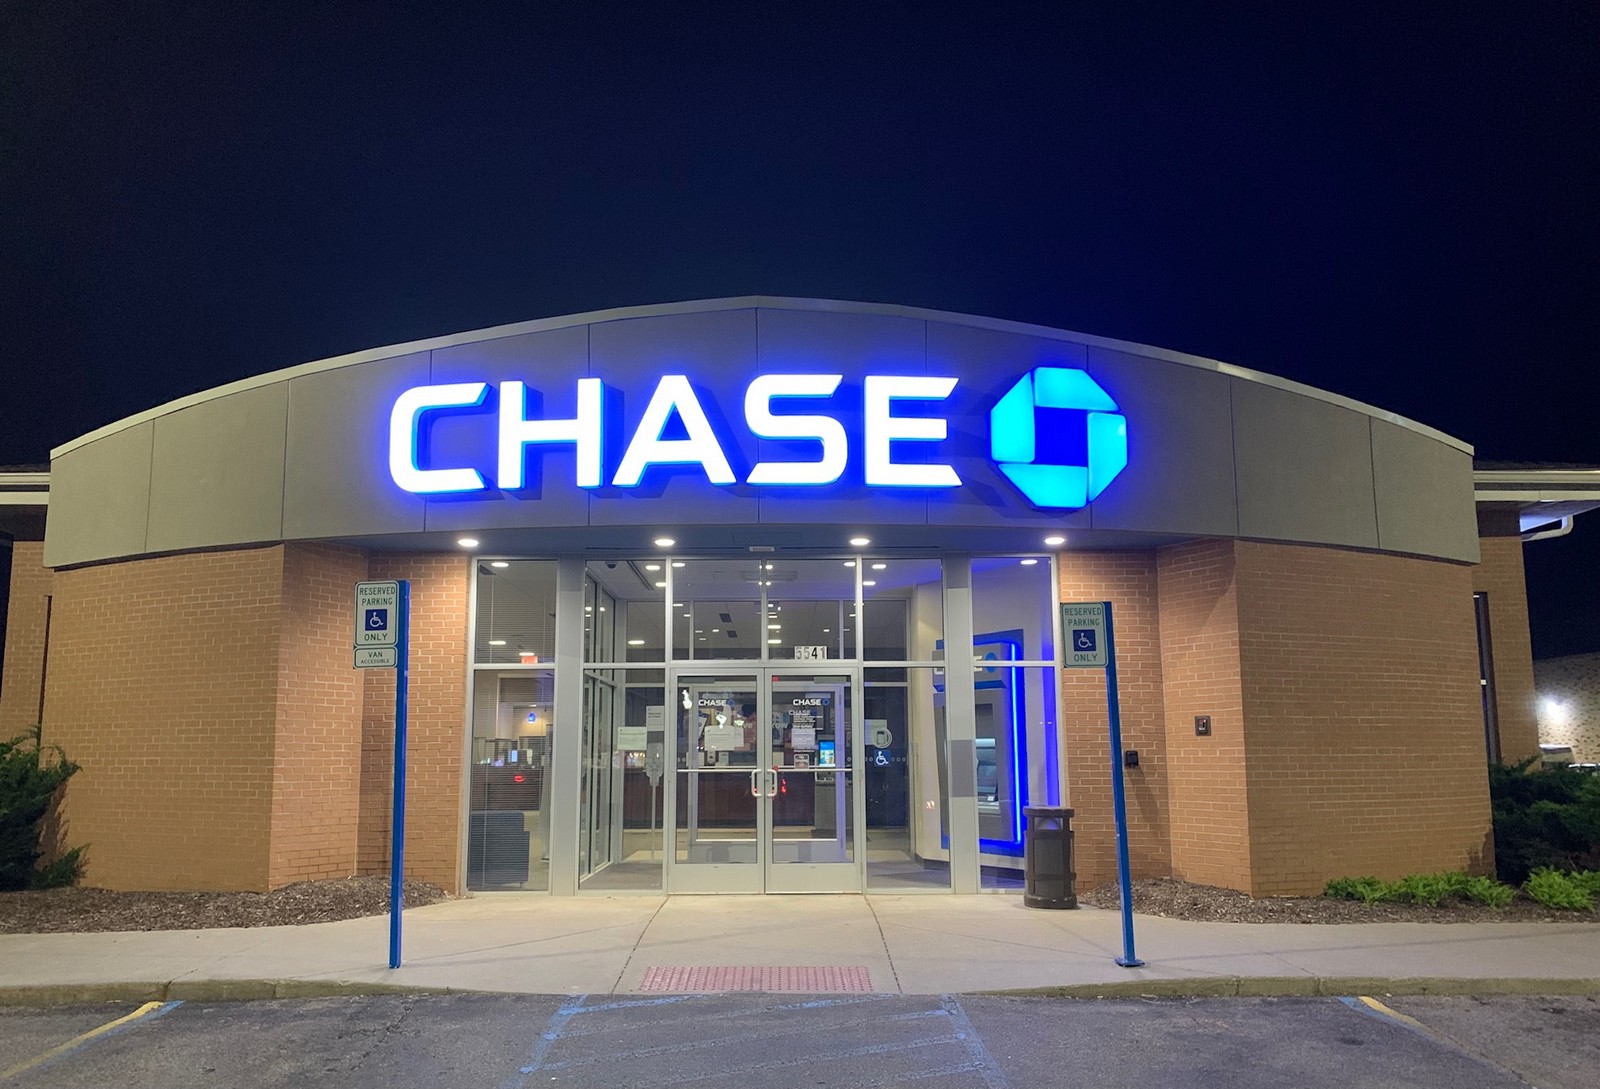 Chase Ultimate Rewards Transfer Times - How Long Does It Take?